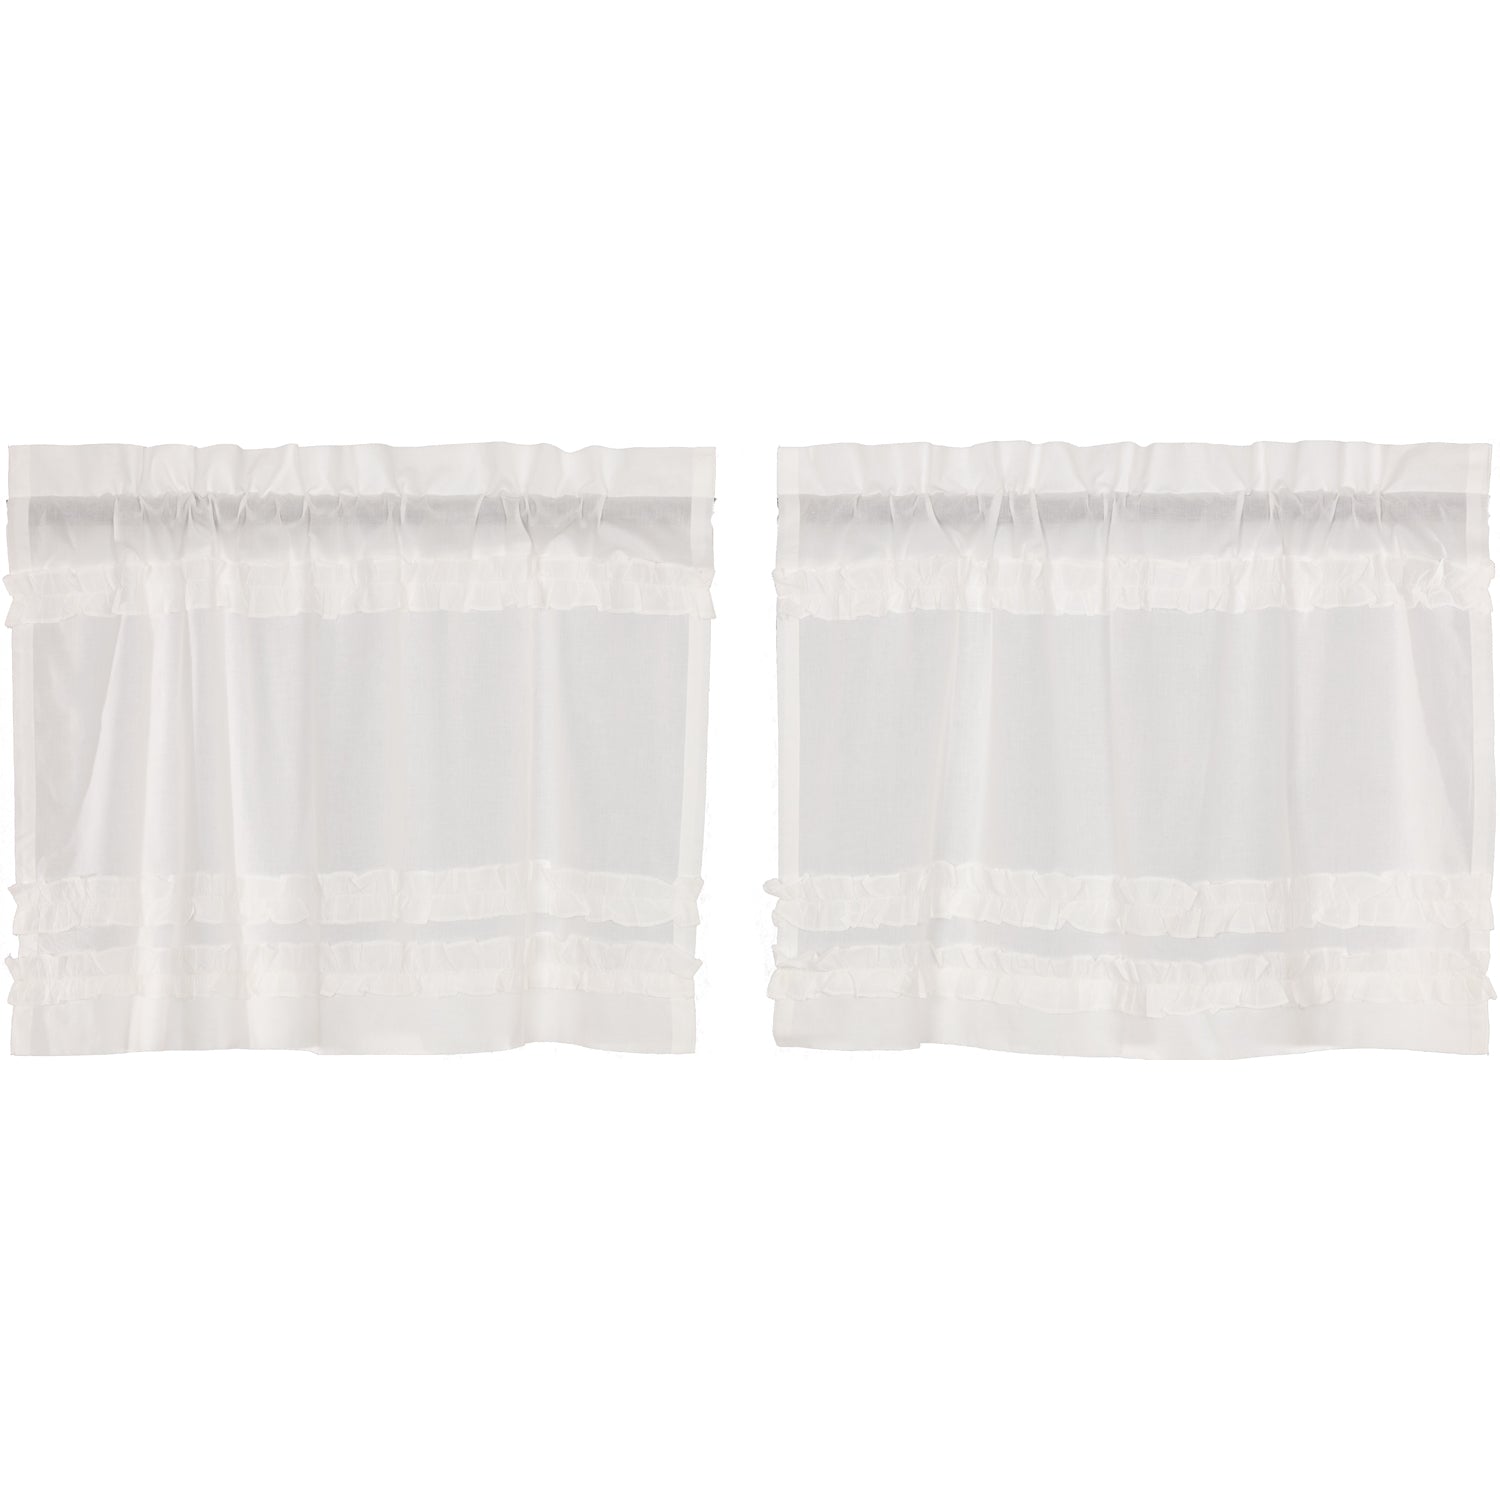 April & Olive White Ruffled Sheer Petticoat Tier Set of 2 L24xW36 By VHC Brands